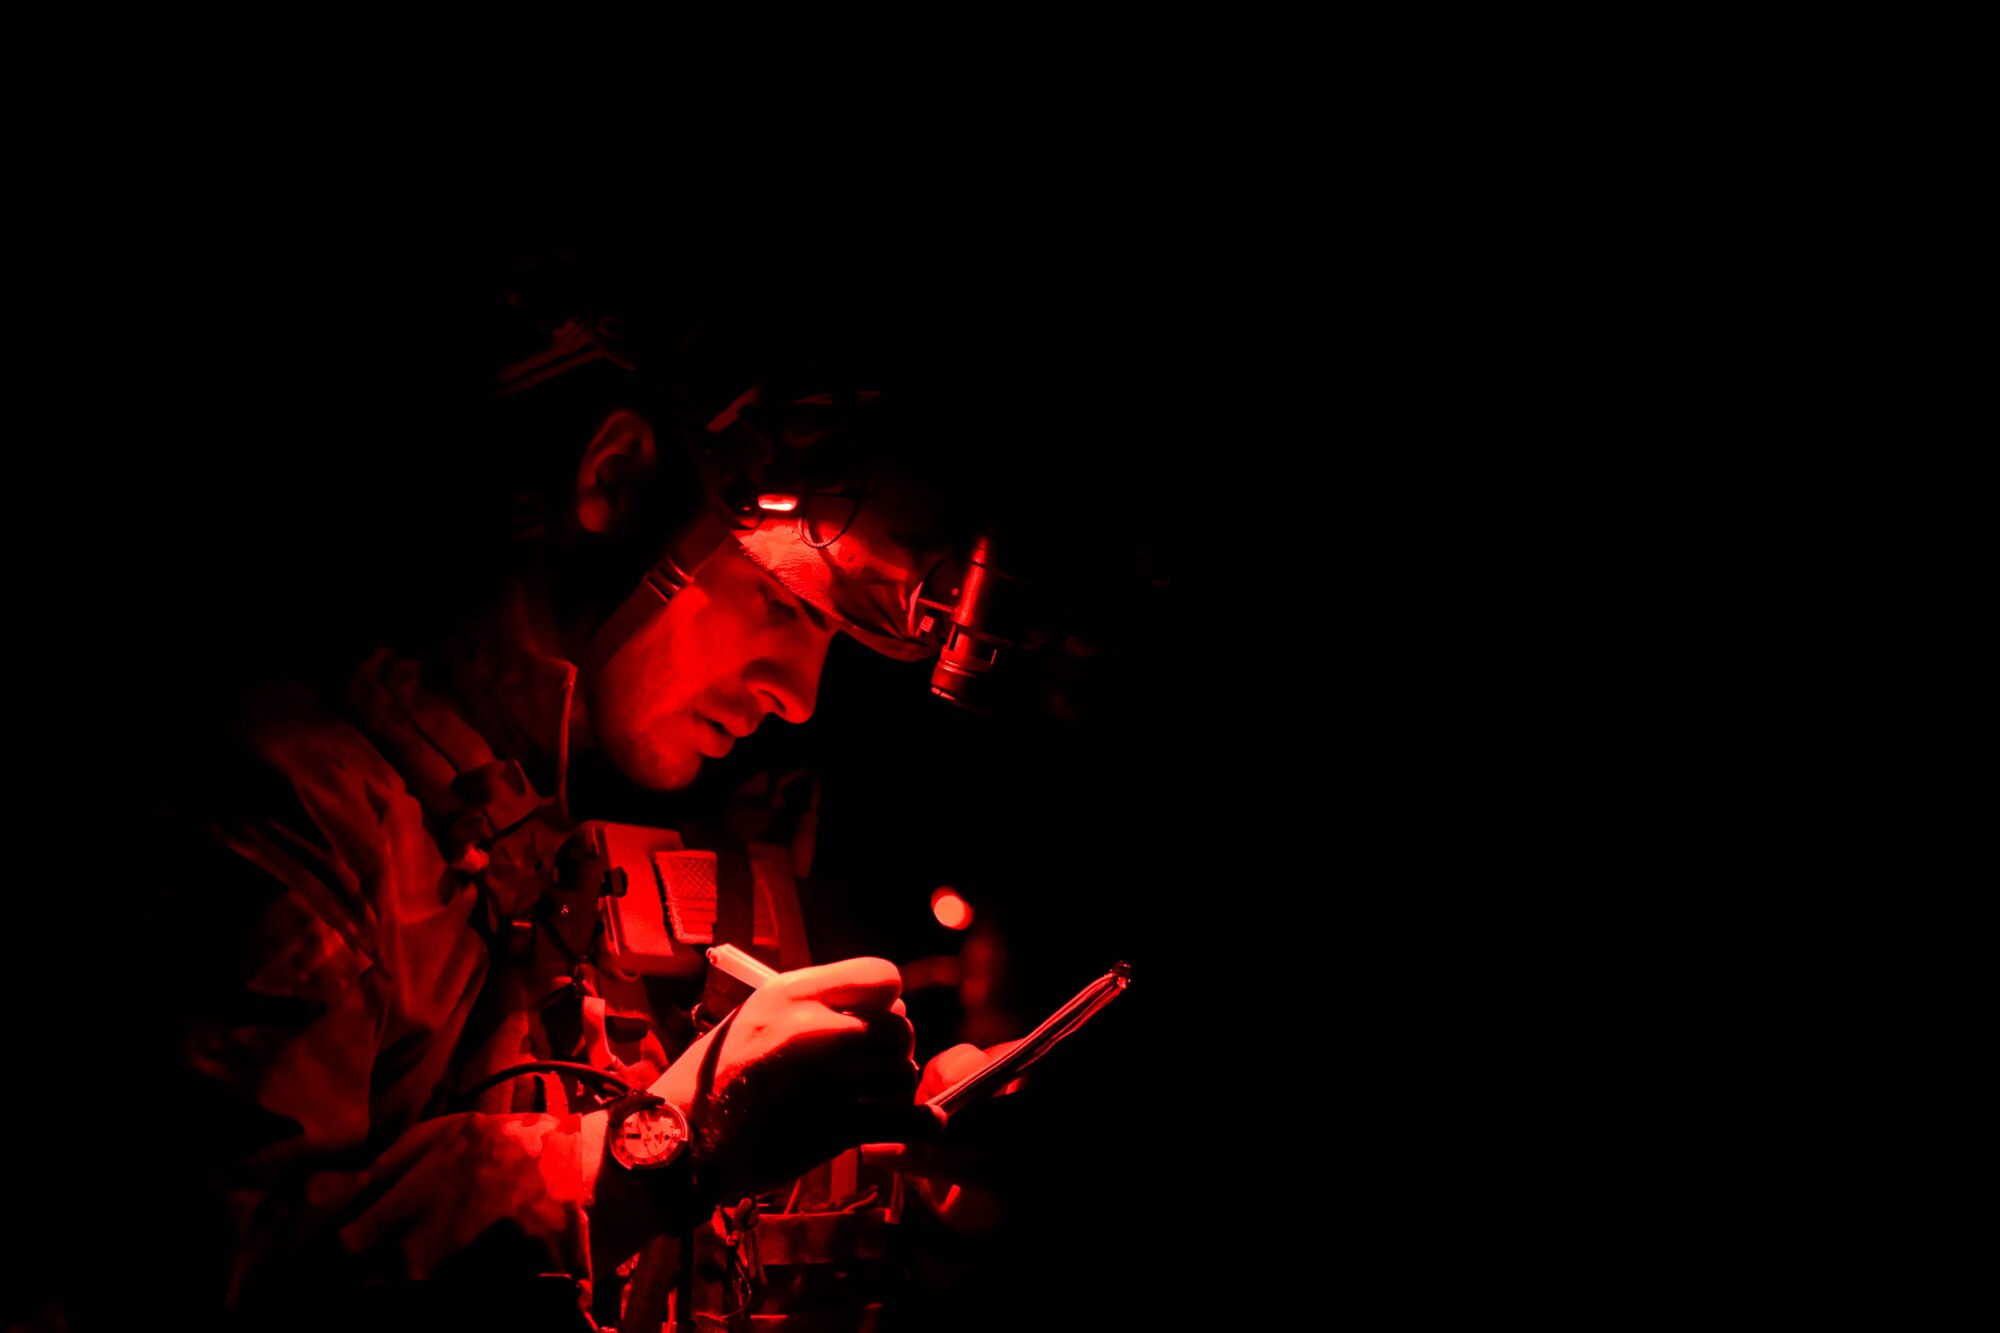 A U.S. Air Force pararescueman from the 57th Rescue Squadron annotates notes at a simulated helicopter crash during exercise Astral Knight 2023 in the Albanian countryside May 23, 2023. Exercises like AK23 support NATO Allies and partner nations operational readiness and strengthens partnerships, crisis response efforts and deter threats. (U.S. Air Force photo by Senior Airman Noah Sudolcan)